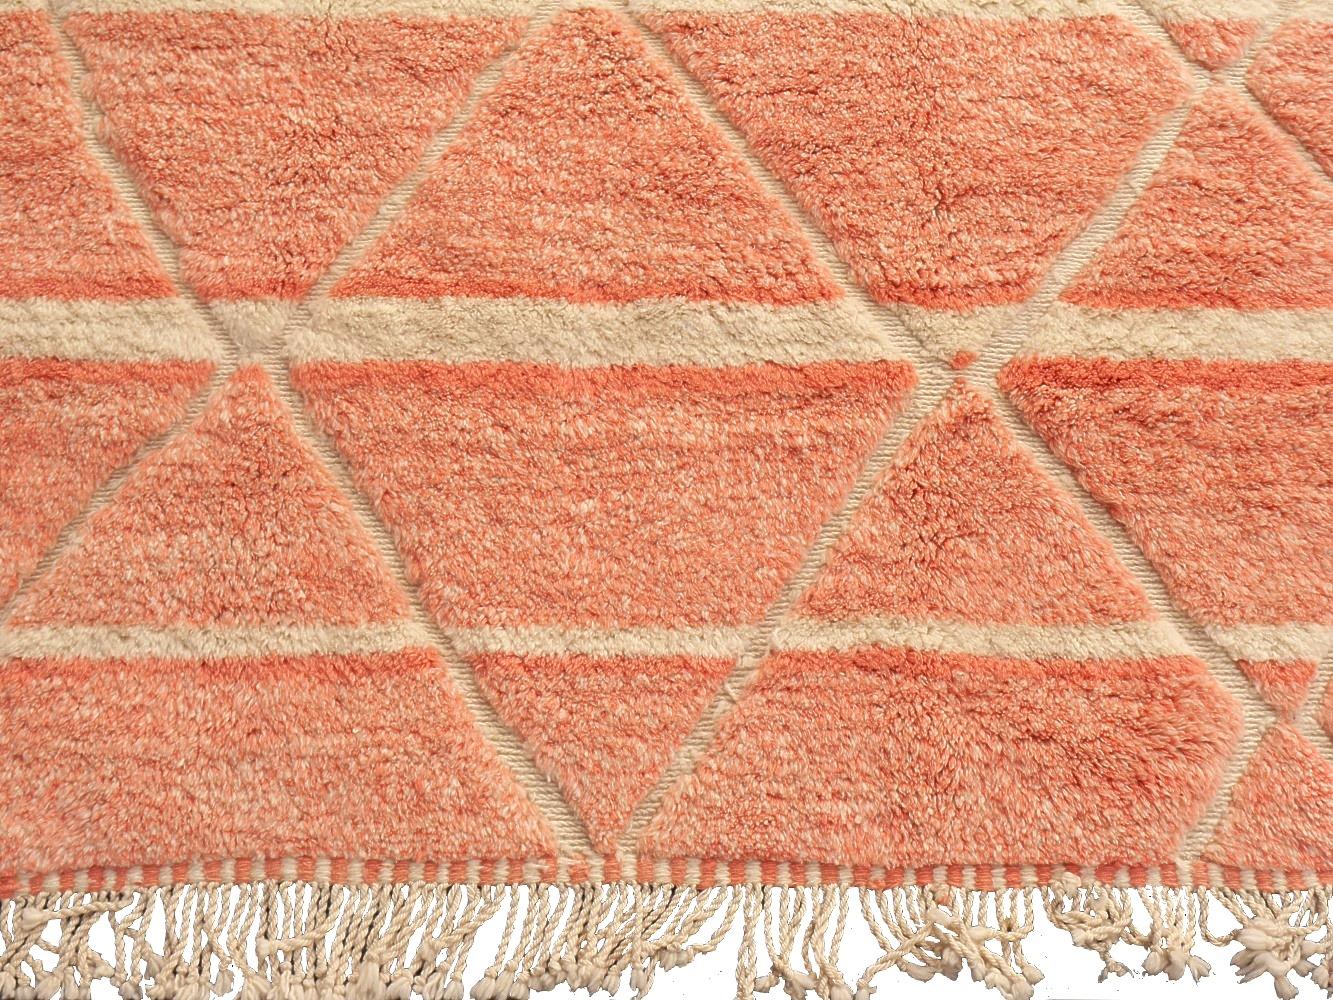 Moroccan Berber Rug Abstract Design Salmon Pink Woolwhite Stunning Quality 1